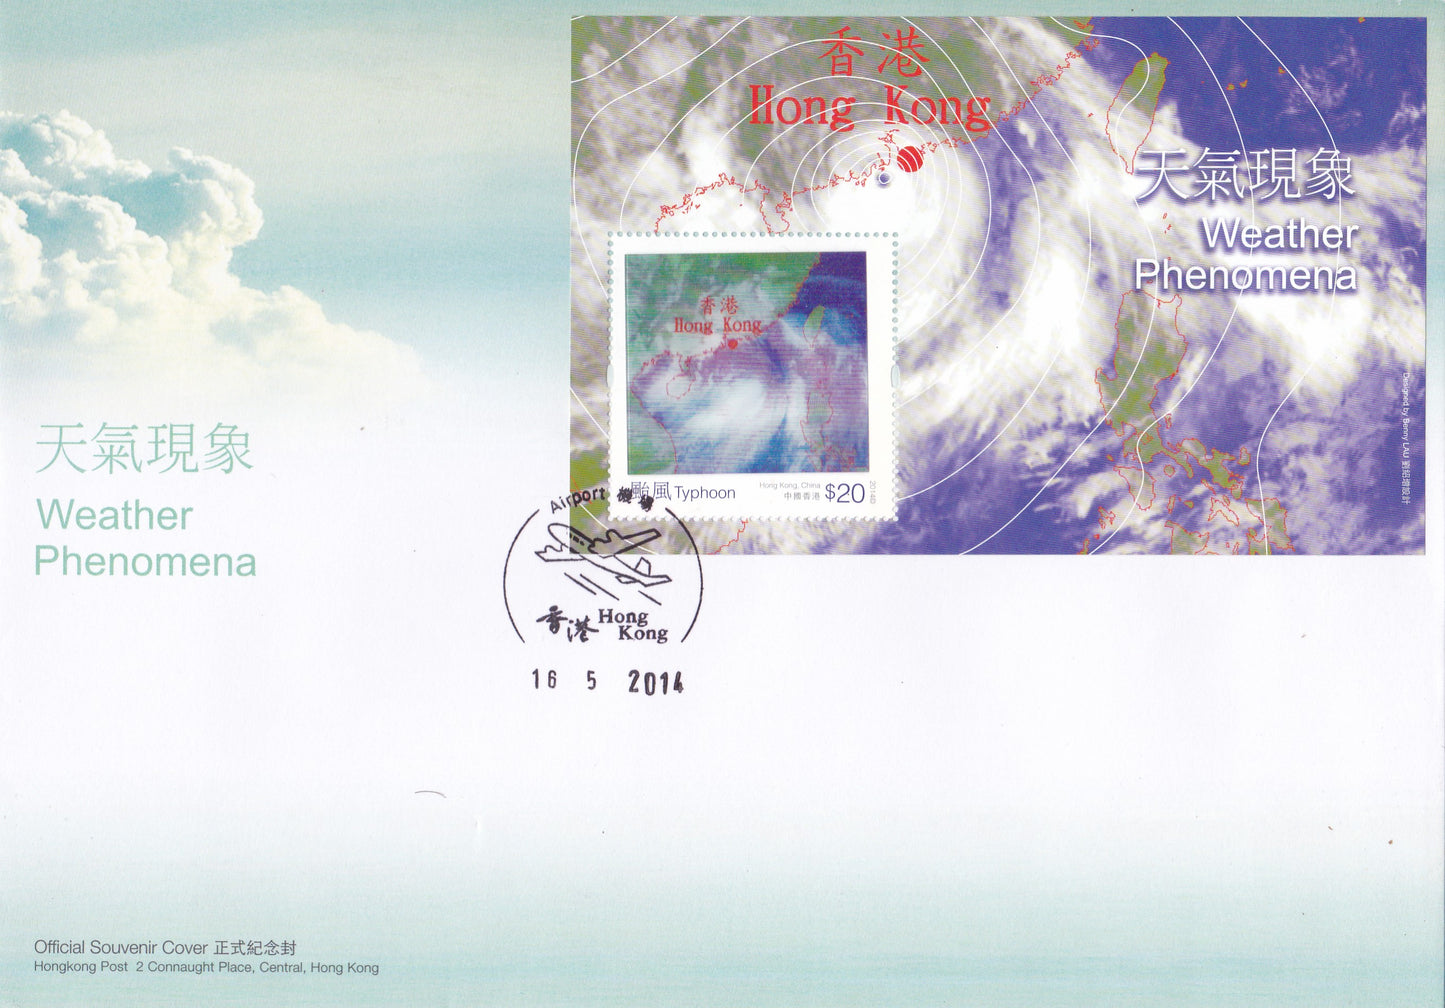 Hongkong-Weather Phenomena typhoon-fdc with lenticular (Moving images) on unusual stamp.